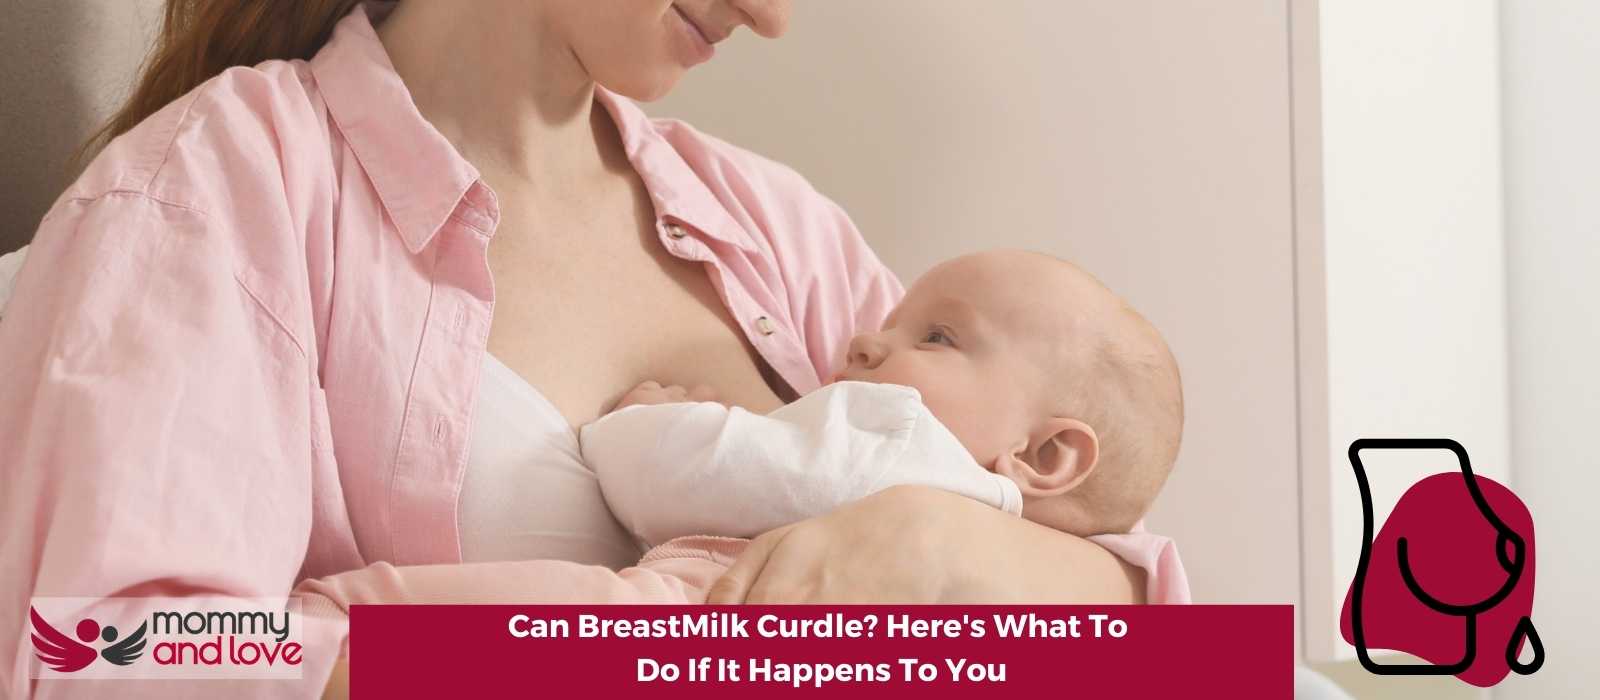 Can BreastMilk Curdle Here's What To Do If It Happens To You